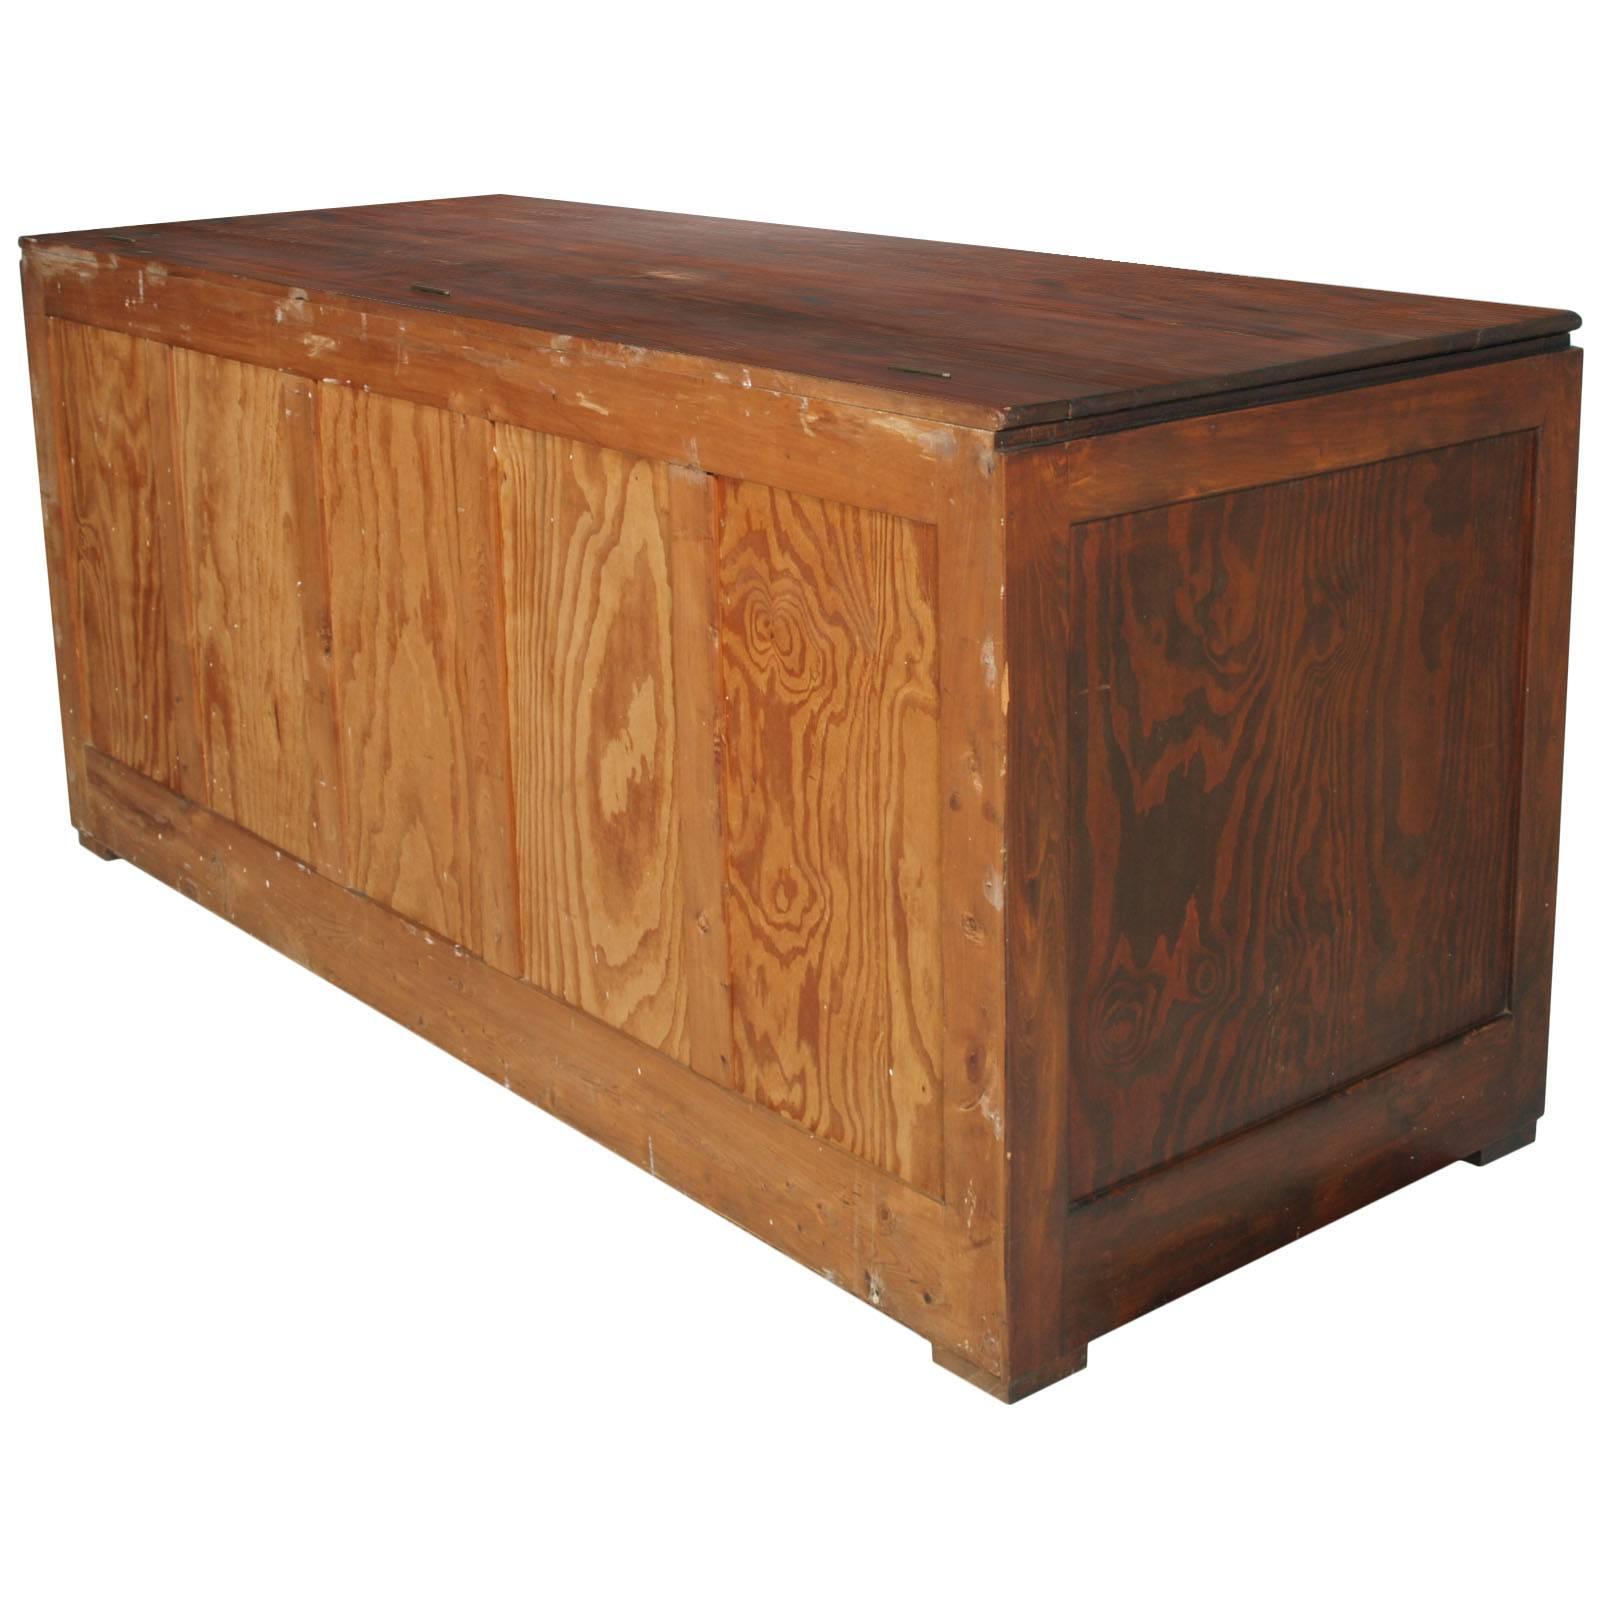 Midcentury large container box trunk for furs shelter in solid wood of pine polished to wax

Measures cm: H 90, W 204, D 80